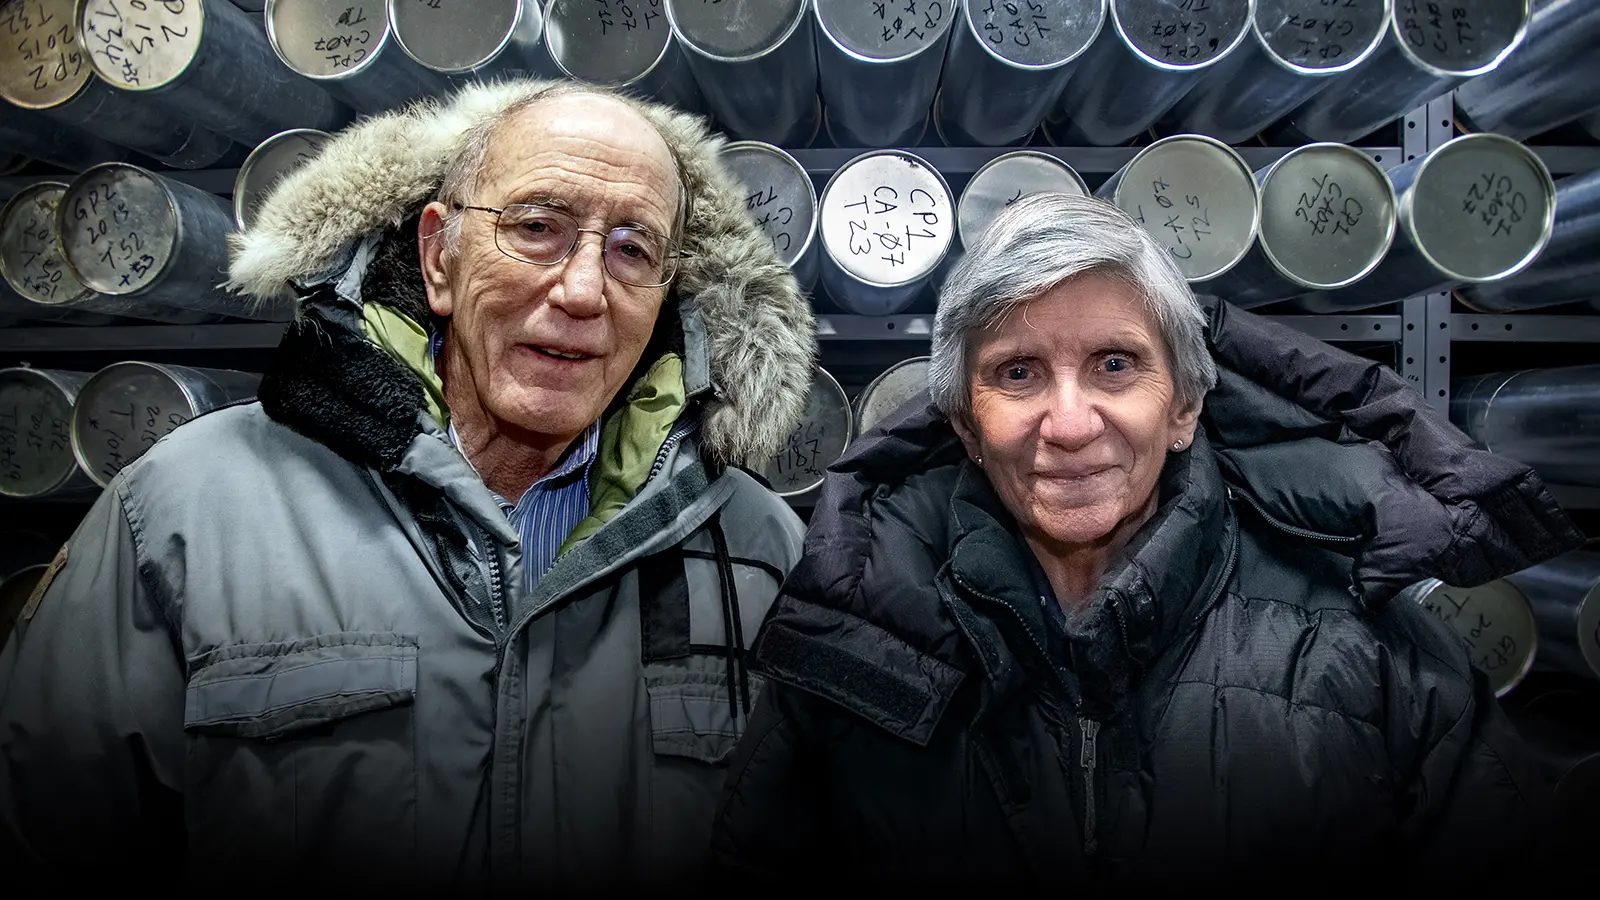 Lonnie Thompson and Ellen Mosley-Thompson in ice core freezer